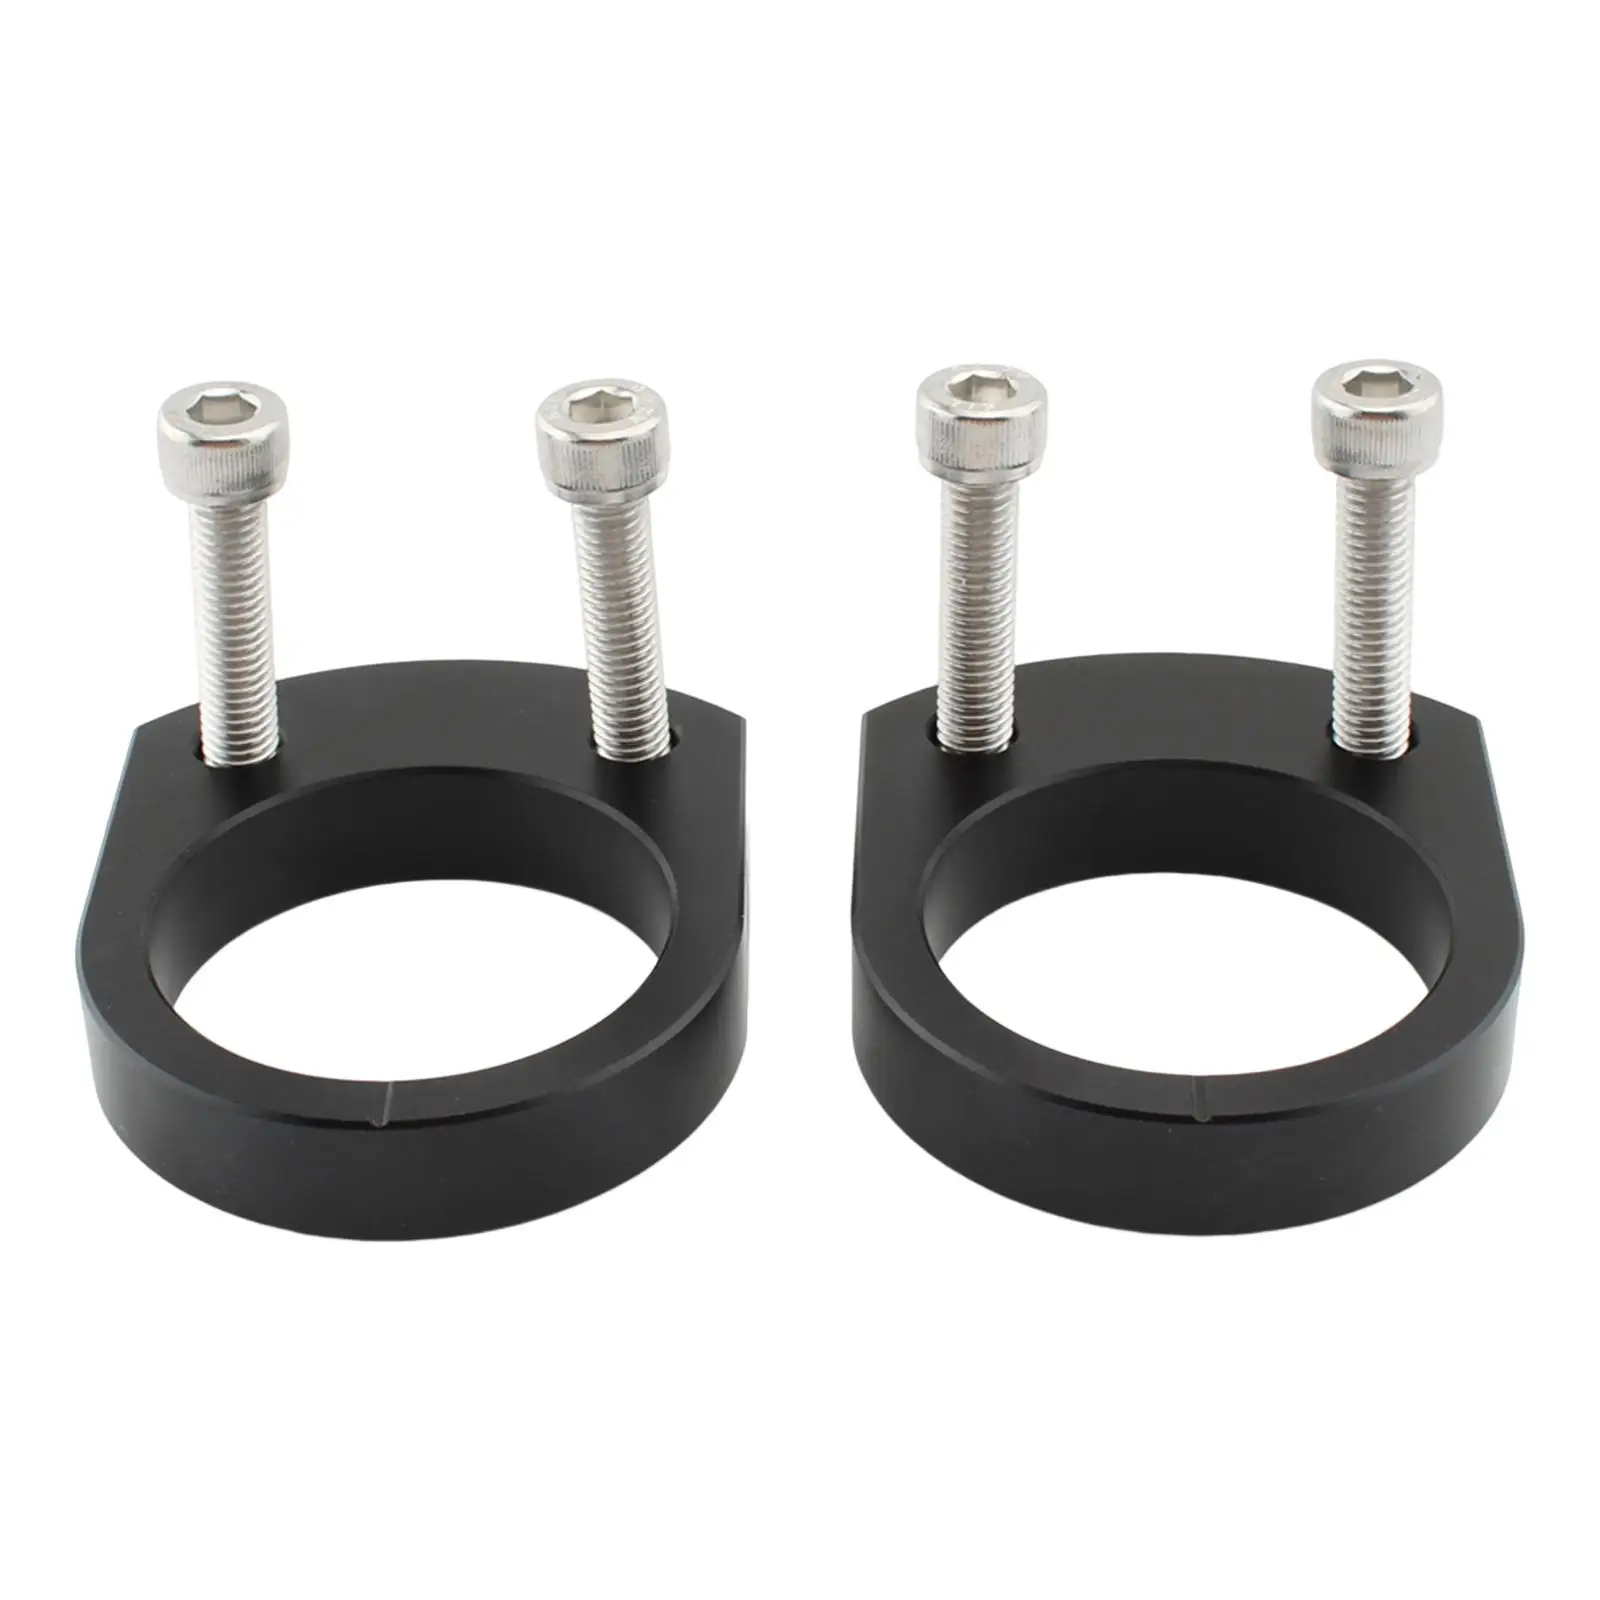 2 Pieces Motorcycle Handlebar Risers 14mm Heightening Lifting Handle Bar Riser Clamp for Kawasaki ZX-14R Zzr1400 2006-2022